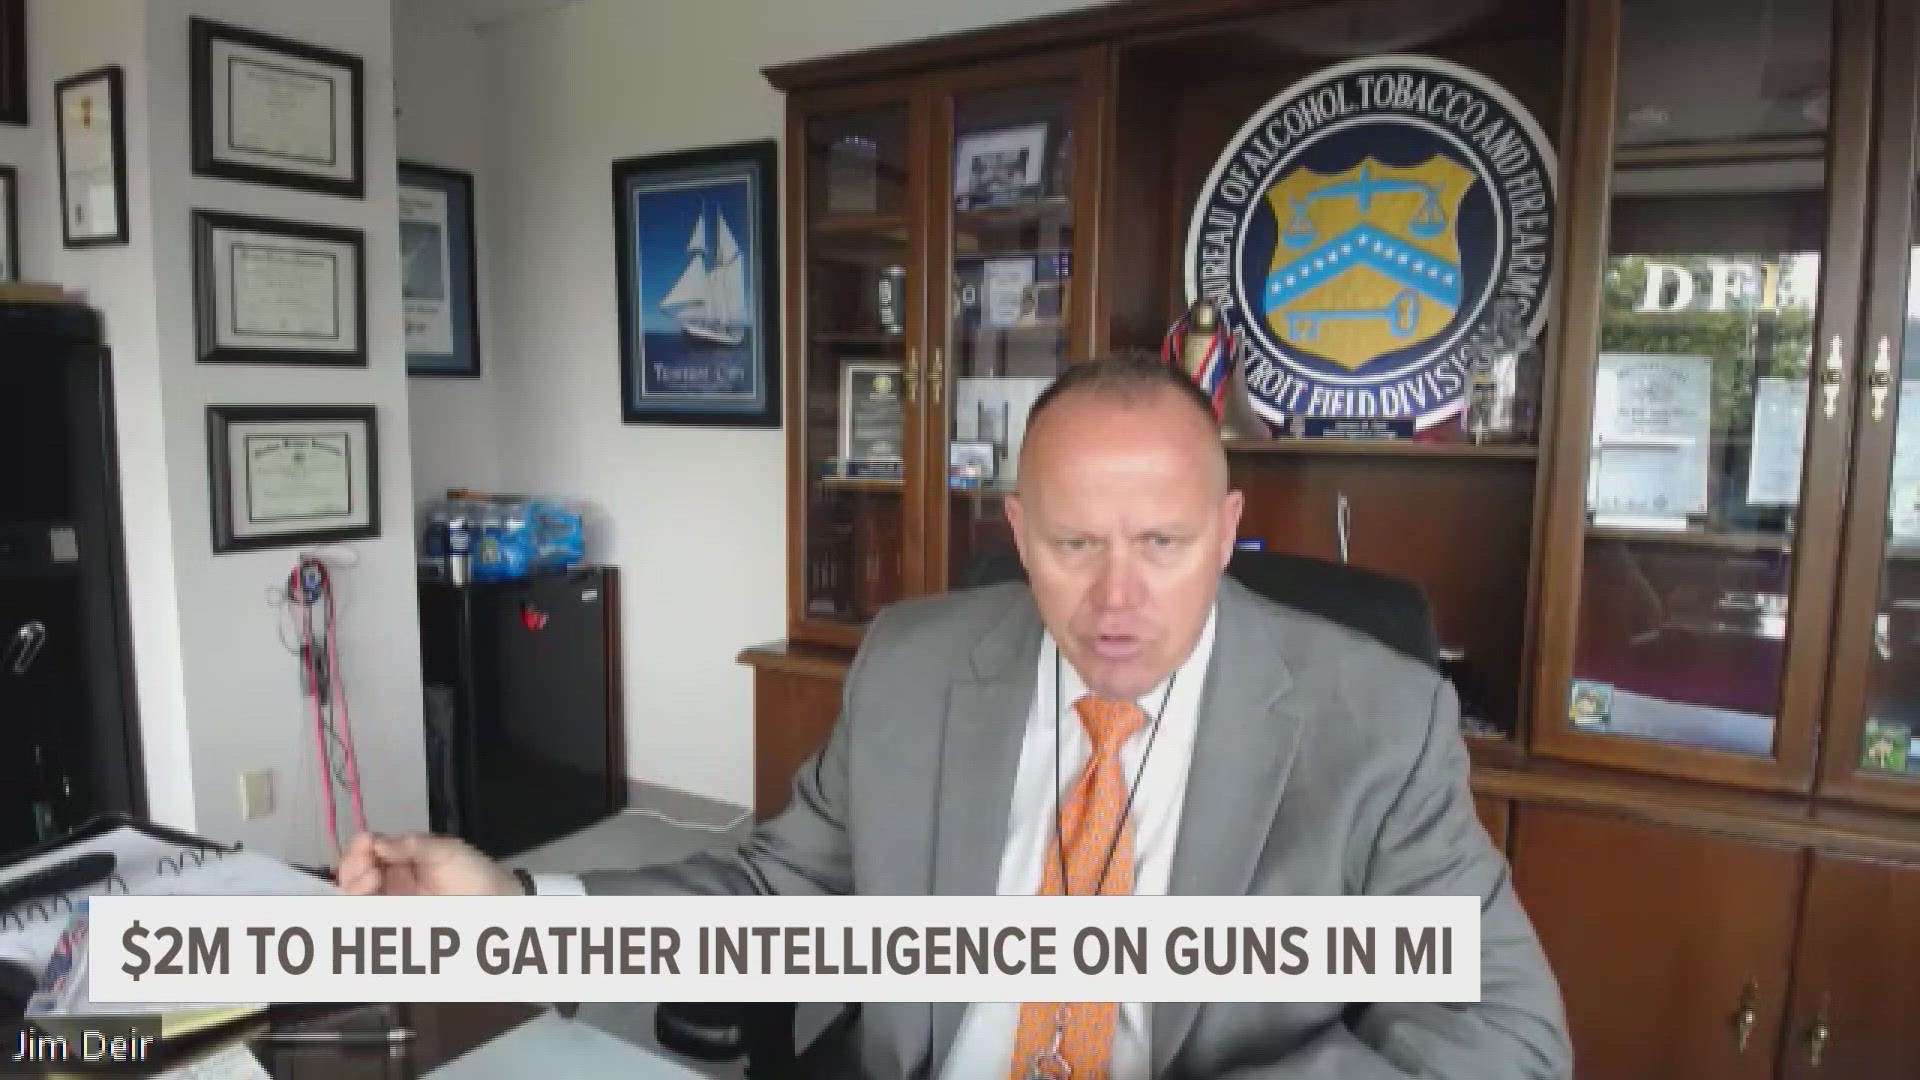 Nearly 2 million dollars from the state budget is going to fund technology that will help police agencies gather intelligence about guns in Michigan.